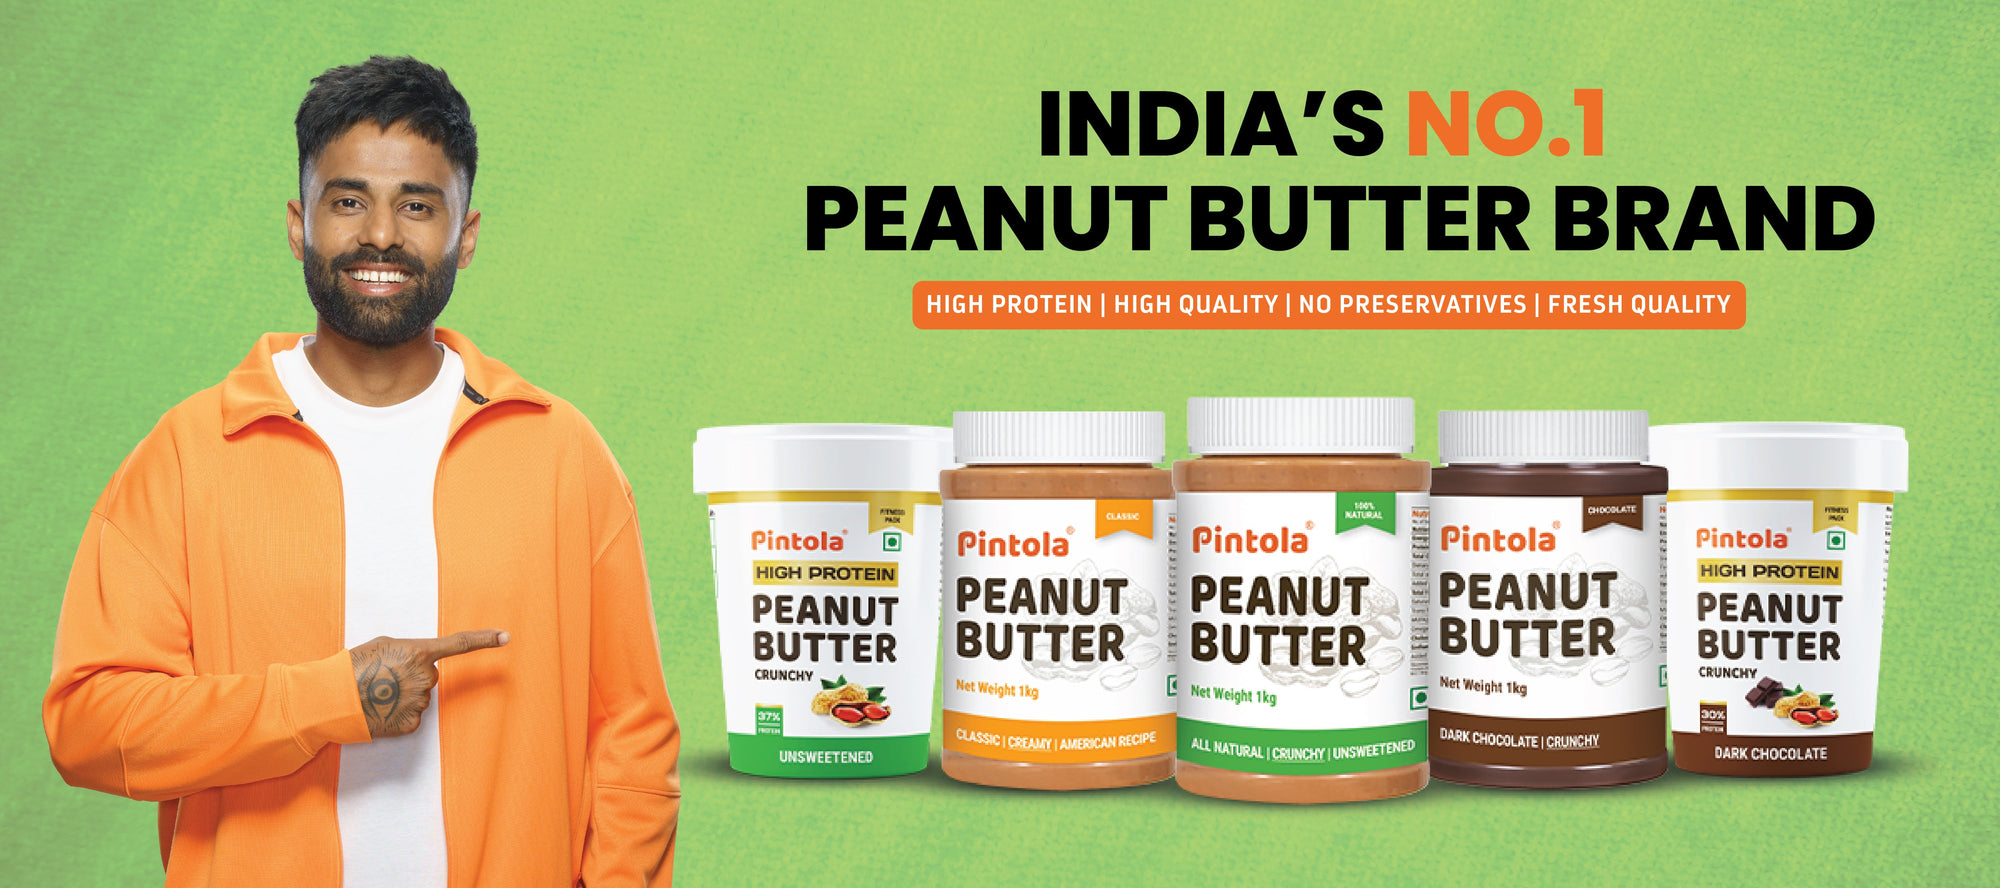 Pintola is India's best peanut butter brand, offering high in protein, fiber-packed, and top-quality peanut butter spreads